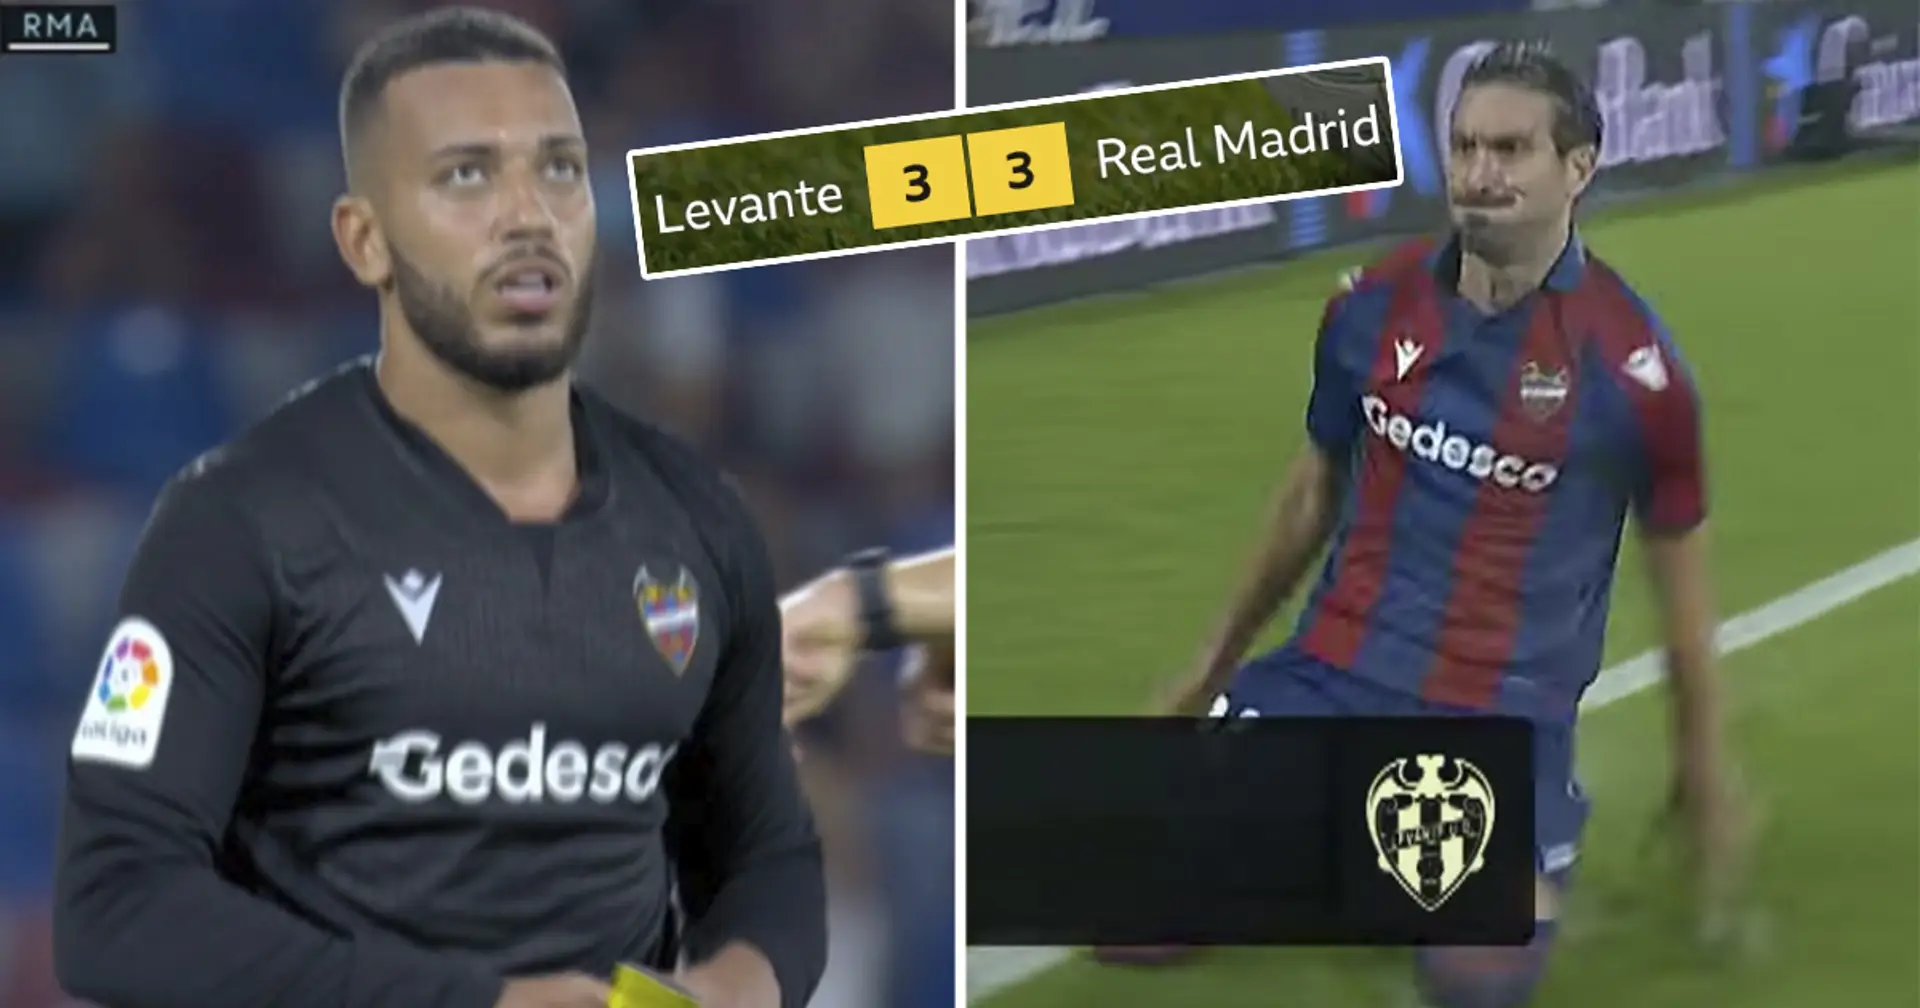 Real Madrid drop points despite playing against 10-man Levante and outfield player as goalie for 10 mins 